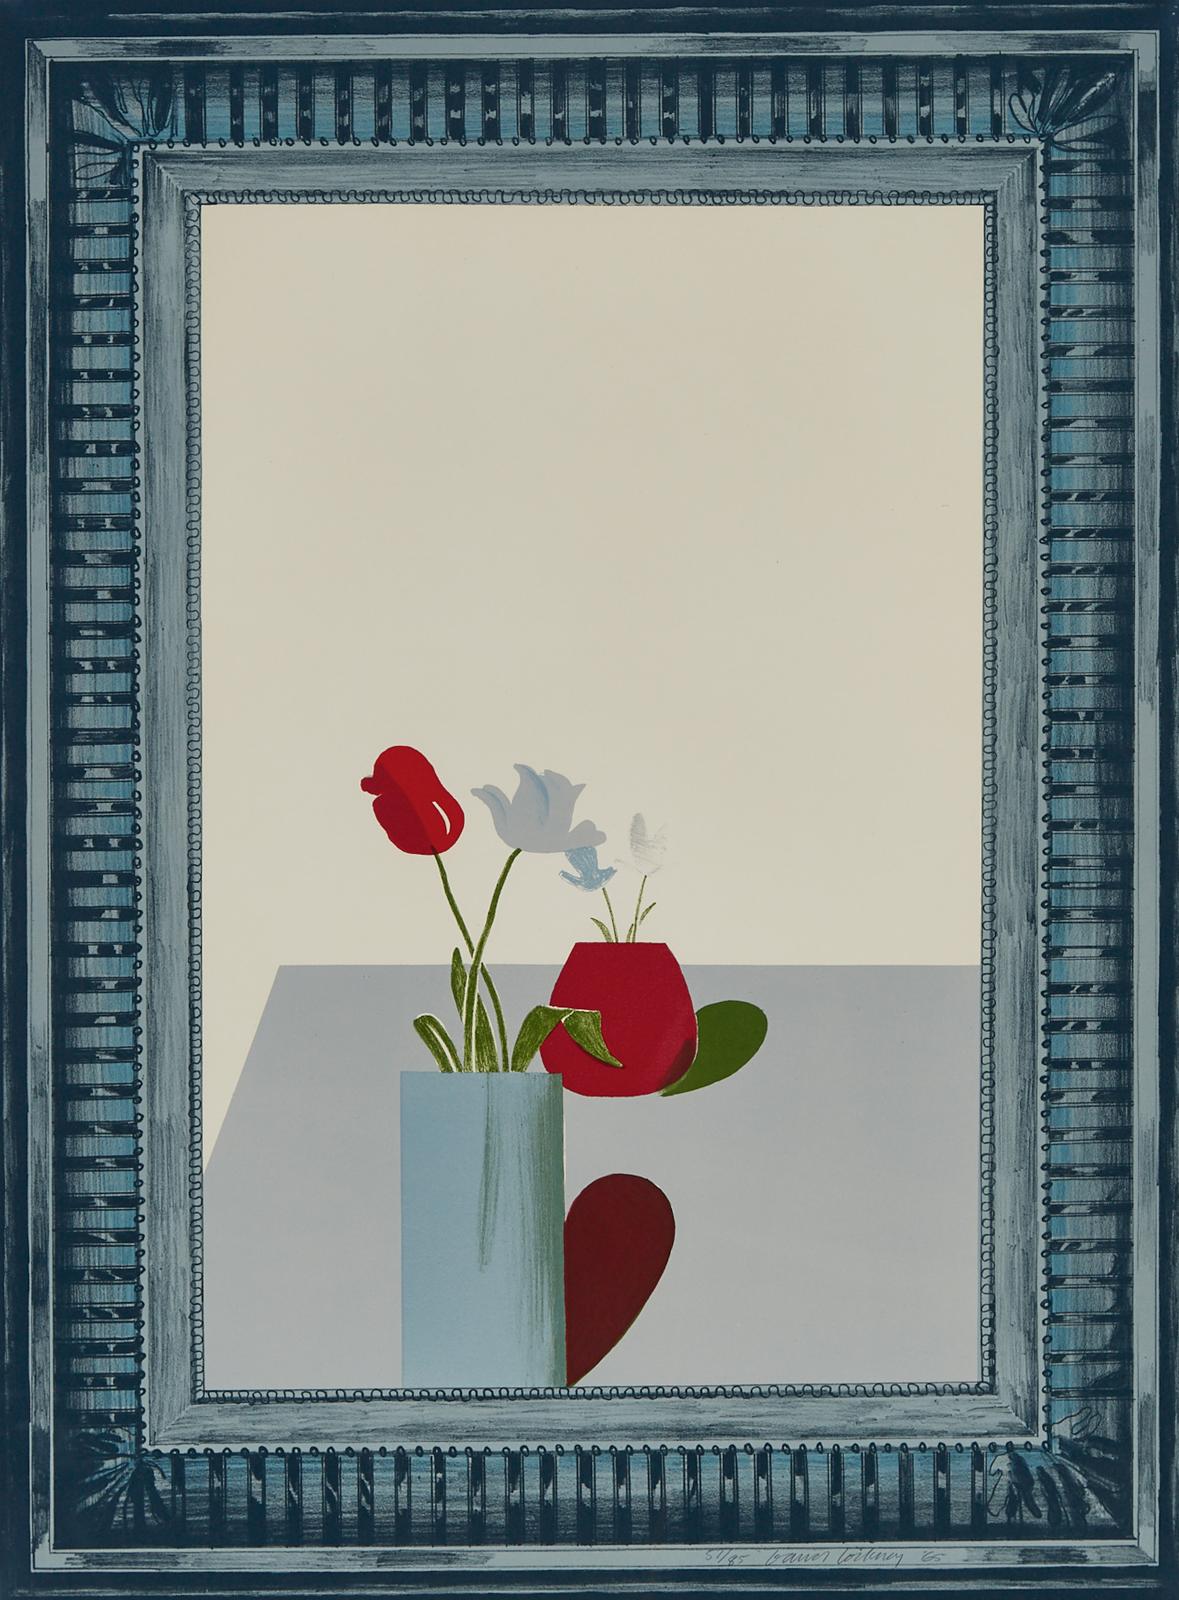 David Hockney (1937) - Picture Of A Still Life That Has An Elaborate Silver Frame (From A Hollywood Collection), 1965 [scottish Arts Council, 41; Museum Of Contemporary Art, Tokyo, 41]